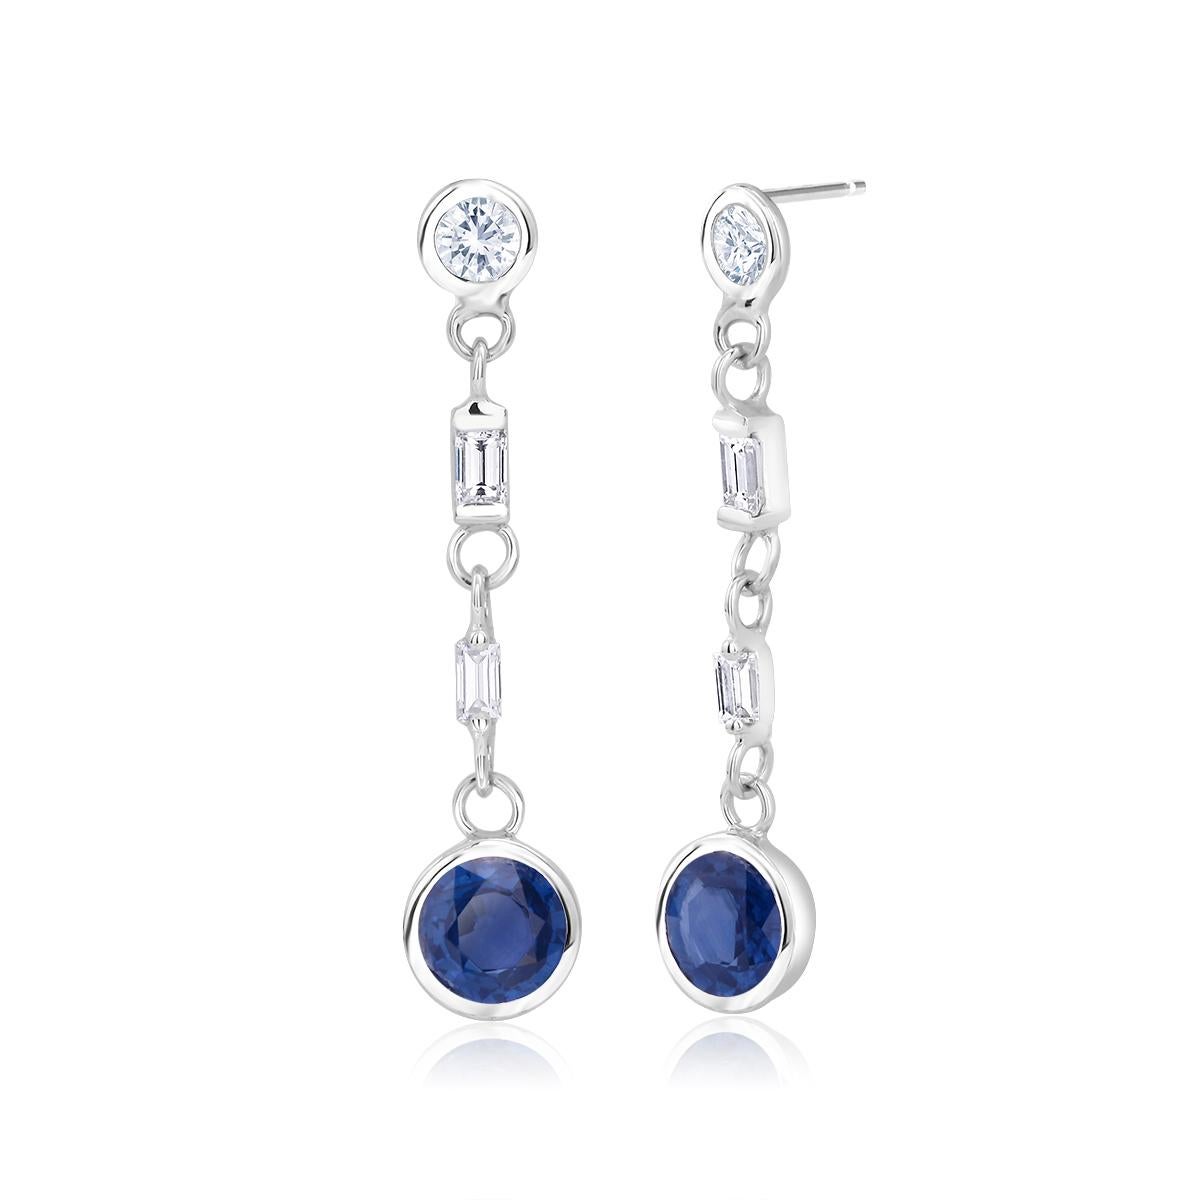 Round Cut Round Sapphire and Baguette Diamond Gold Earrings Weighing 2.30 Carat